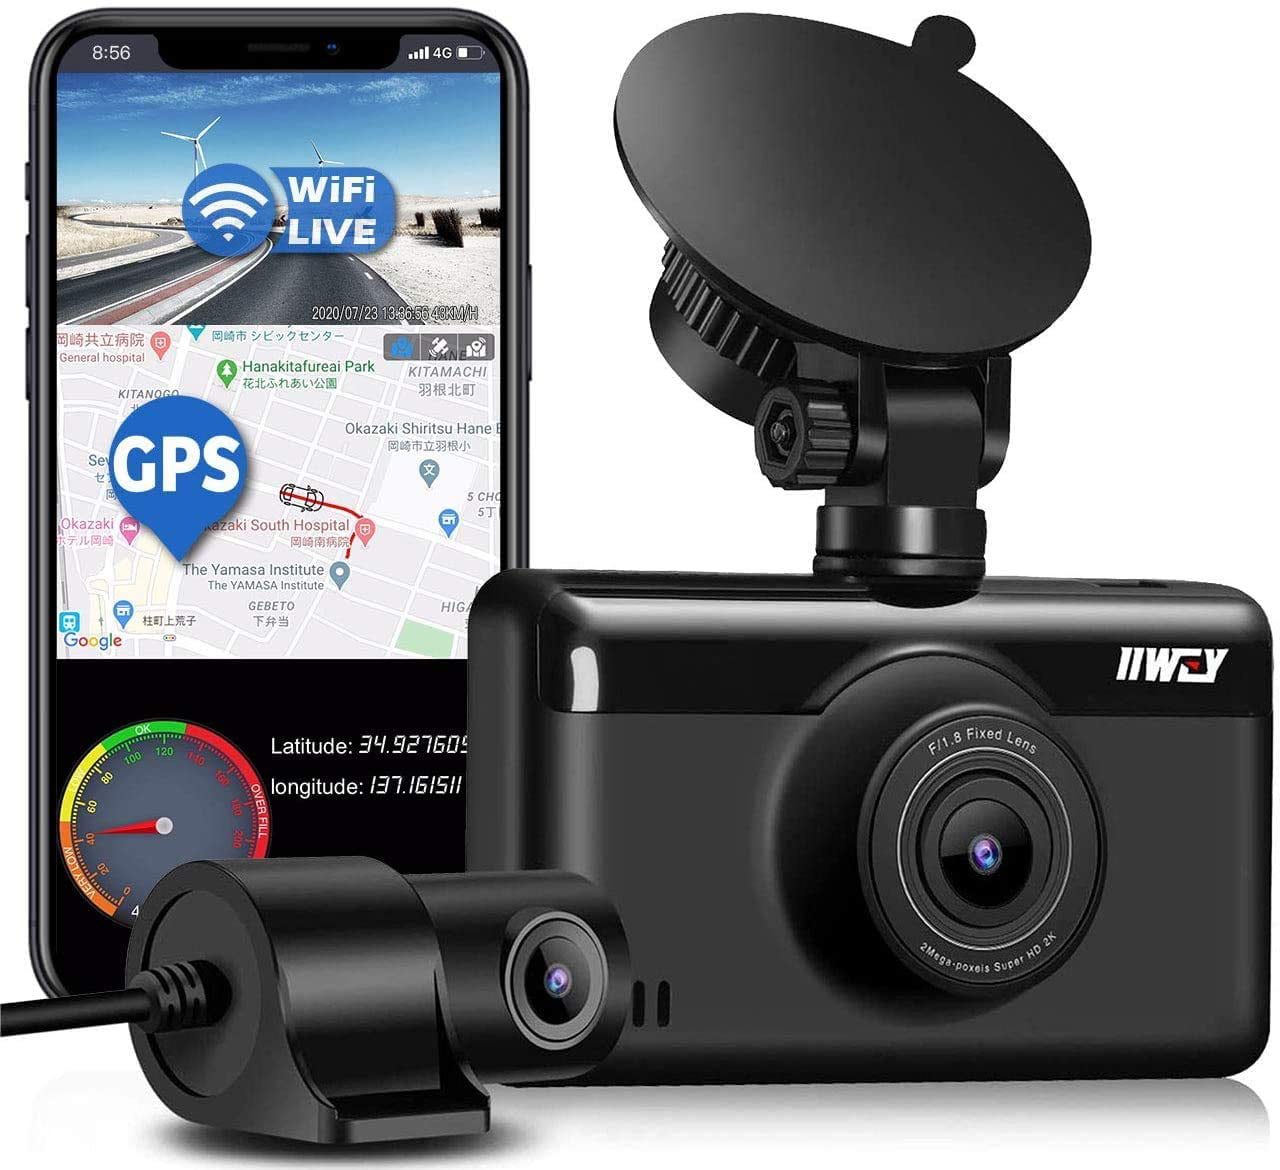 Dash Cam Front and Rear 1440P+1080P Dual Channel Car Dash Camera w//WiFi Anti-Glare Filter Supercapacitor Parking Monitor Super Night Vision GPS G-Sensor Support 256GB Storage VIOFO A139 2CH